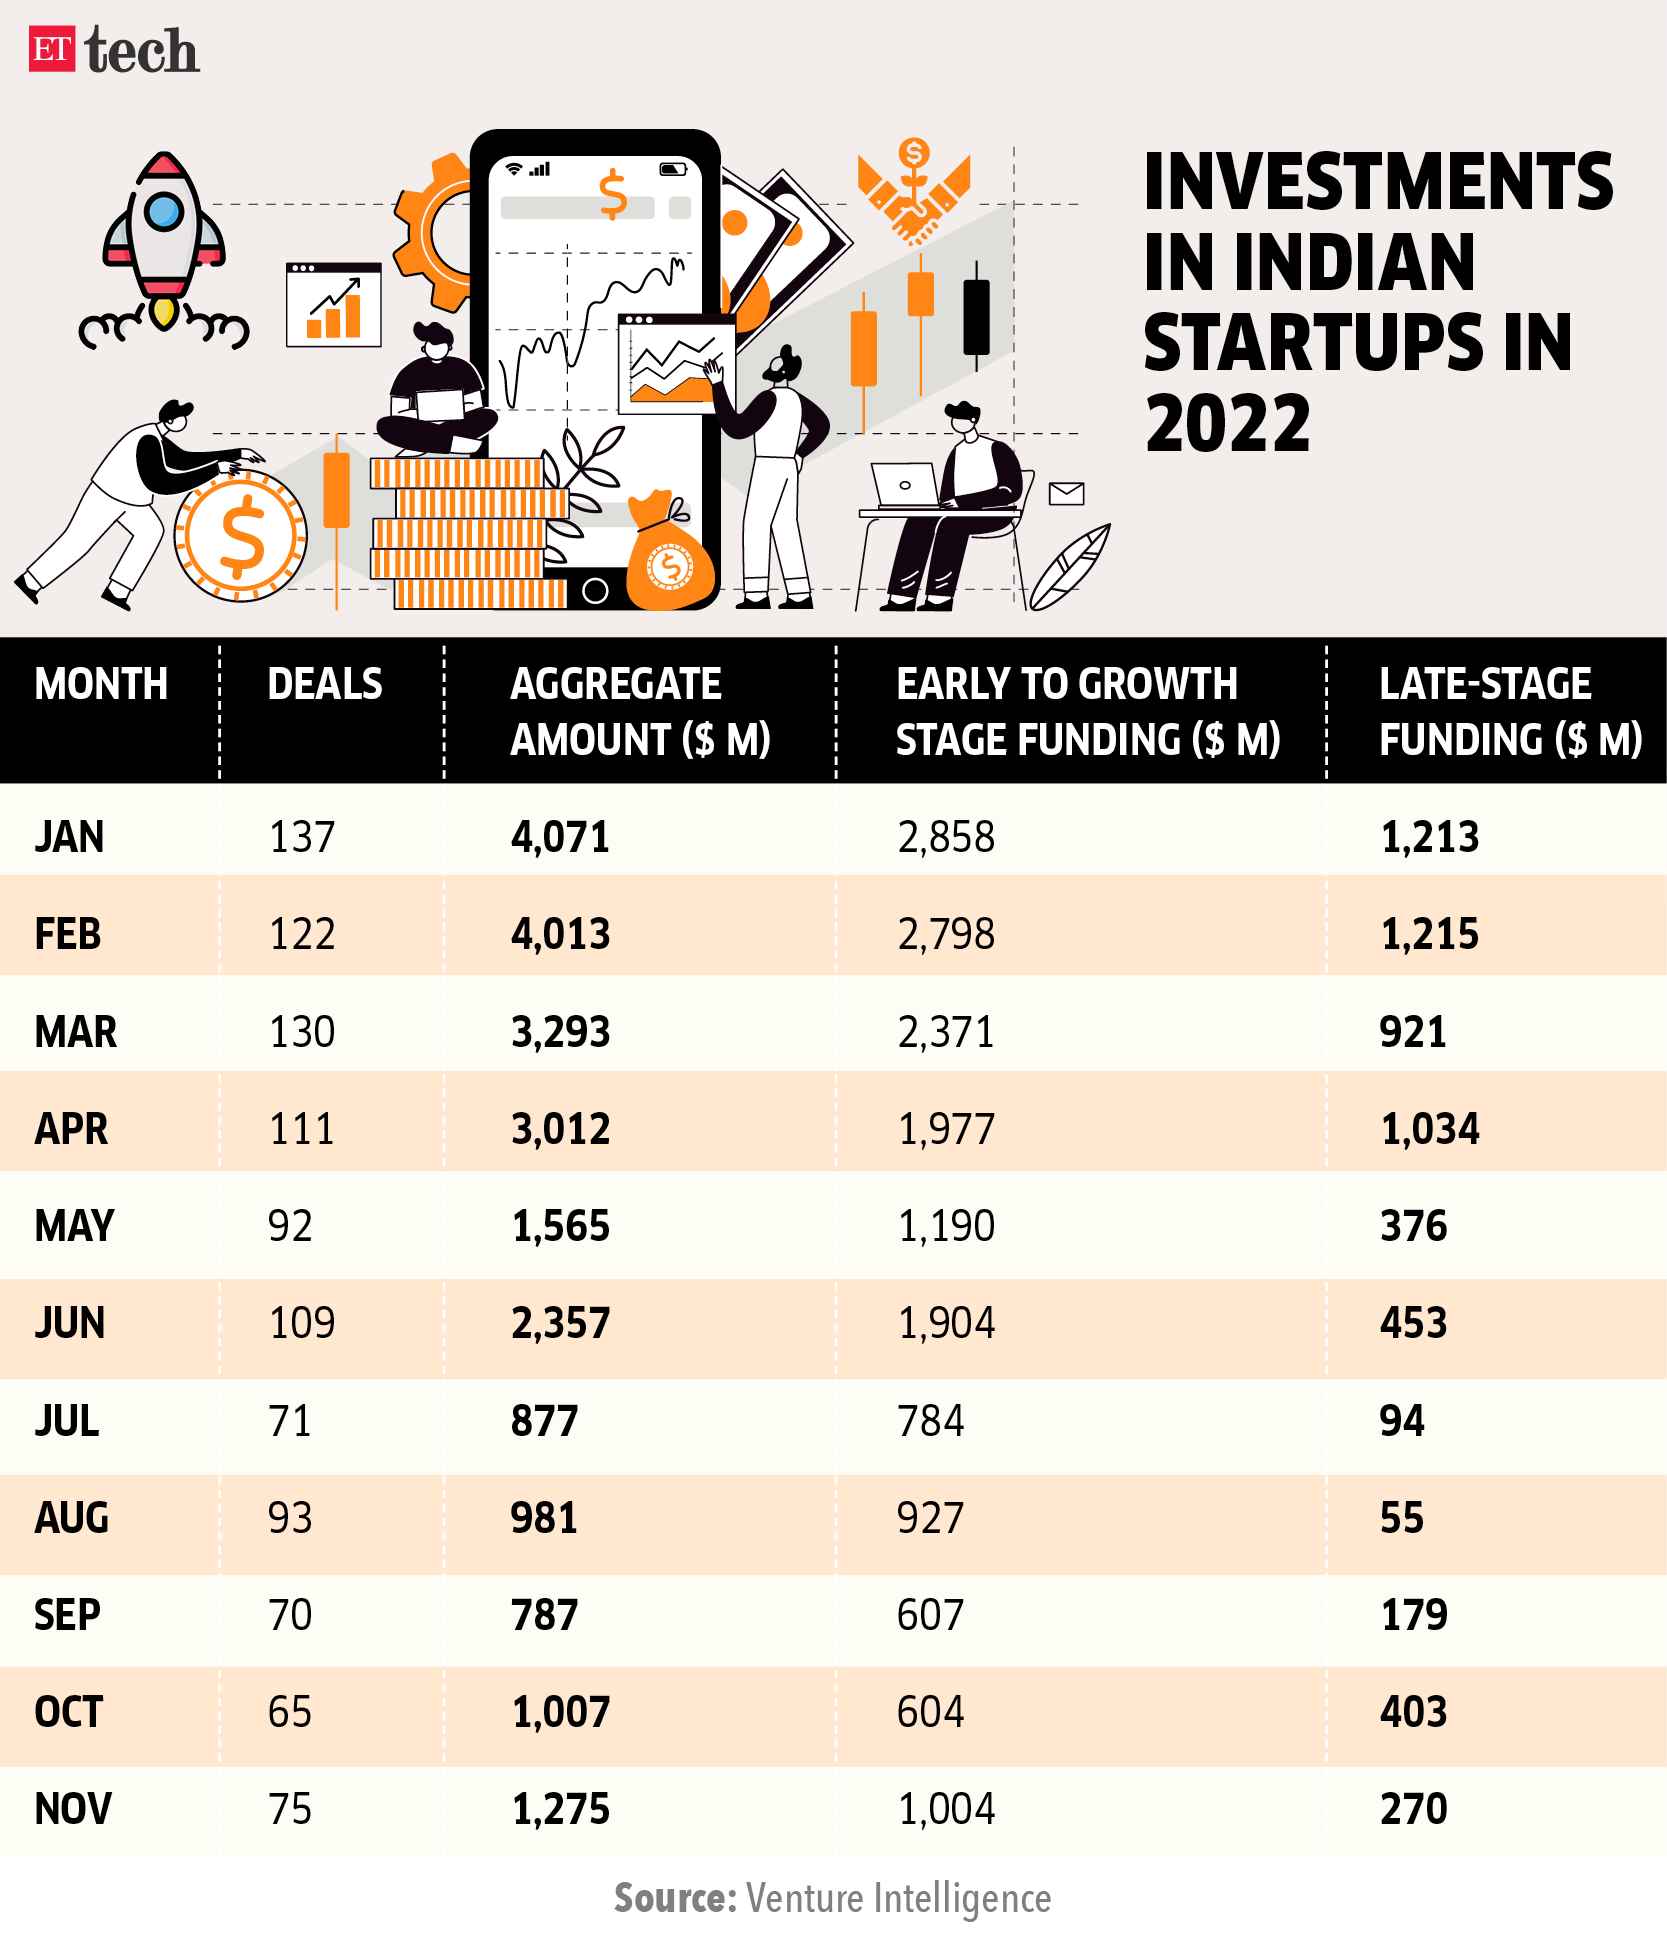 Investments in Indian startups